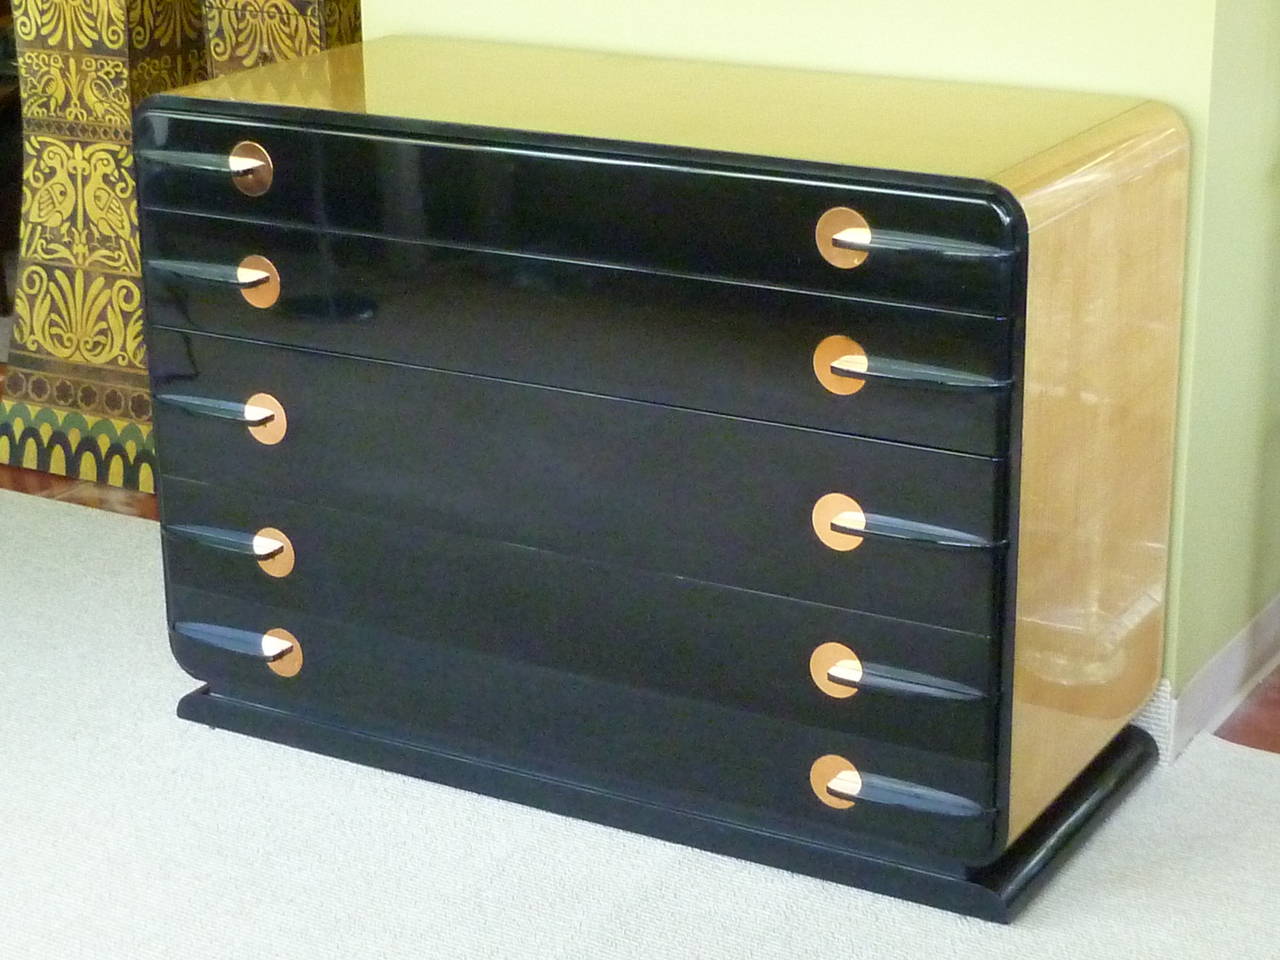 A stellar designed Art Deco streamline moderne commode with black lacquer front and lustrous harewood sides and top. In the style of Donald Deskey and Gilbert Rohde, it has subtle curves and aerodynamic lines. Featuring five drawers, the top drawer